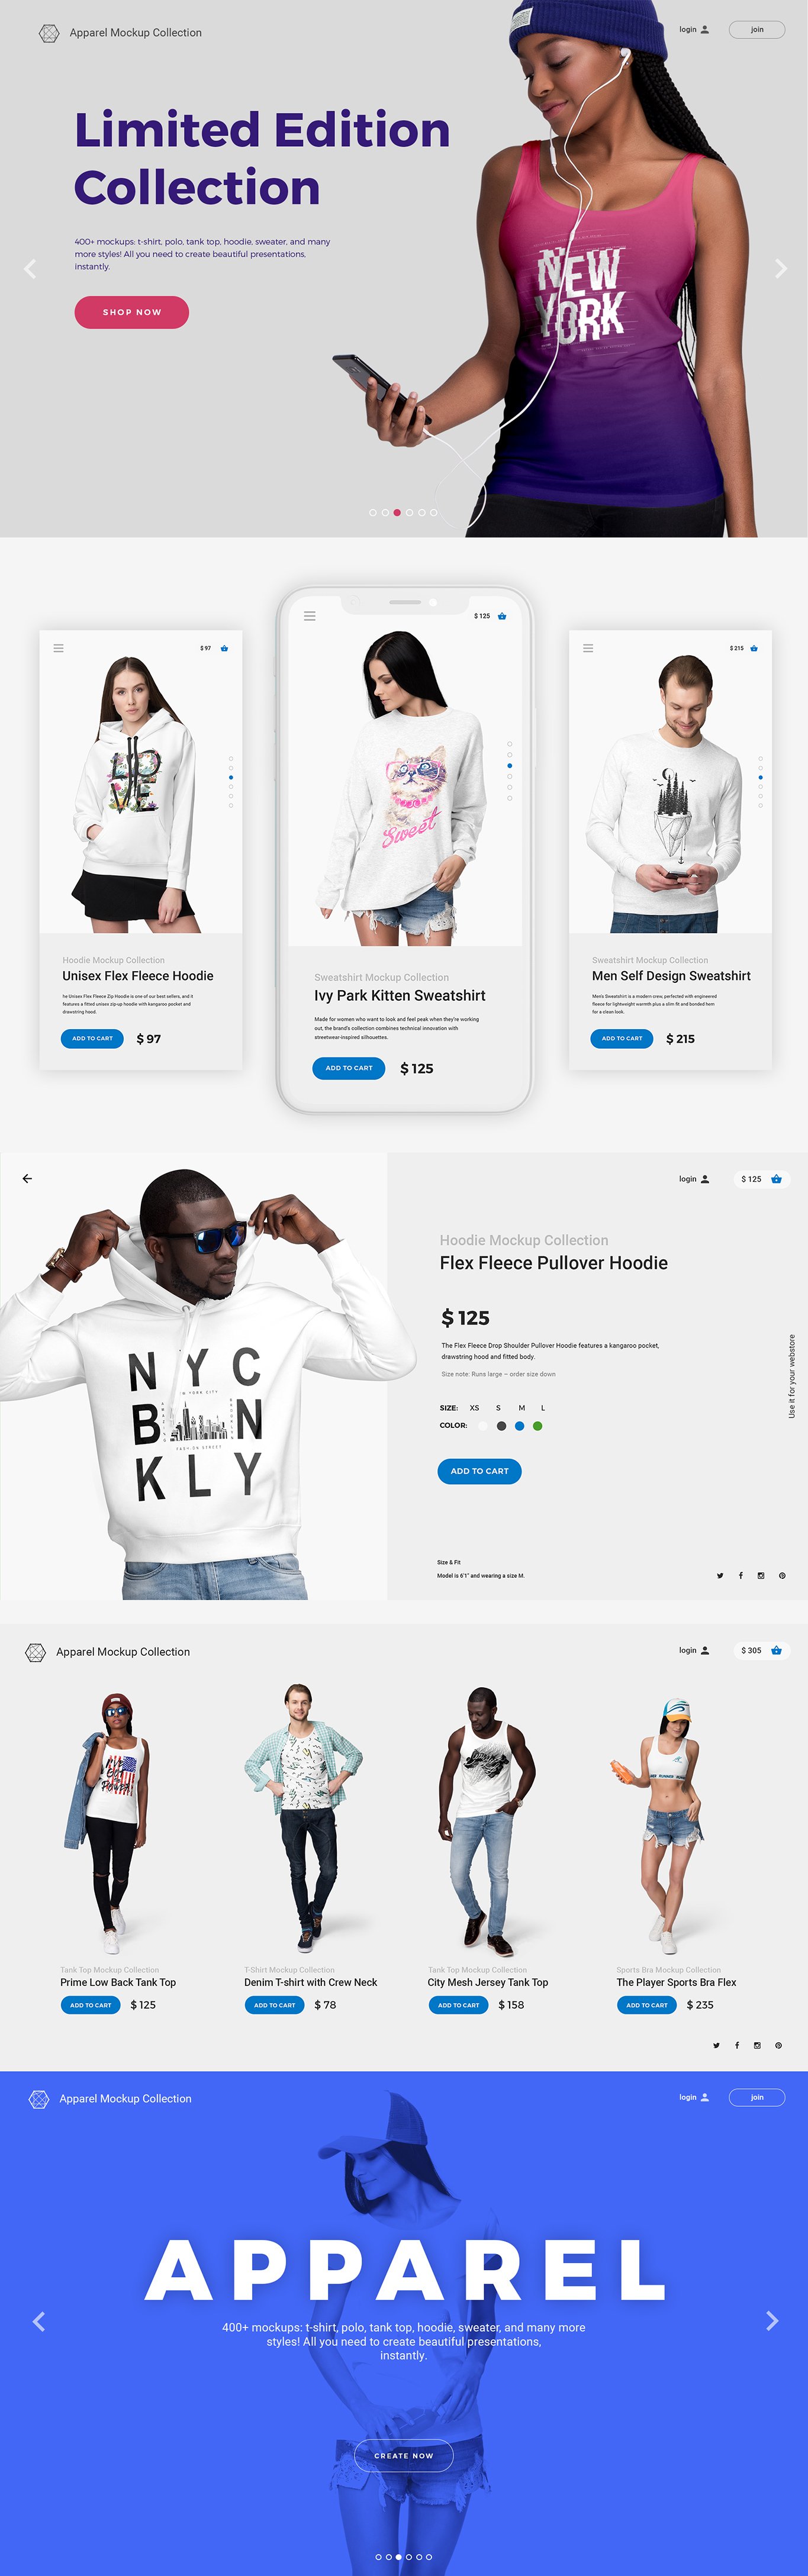 04 ultimate apparel mockup collection 49